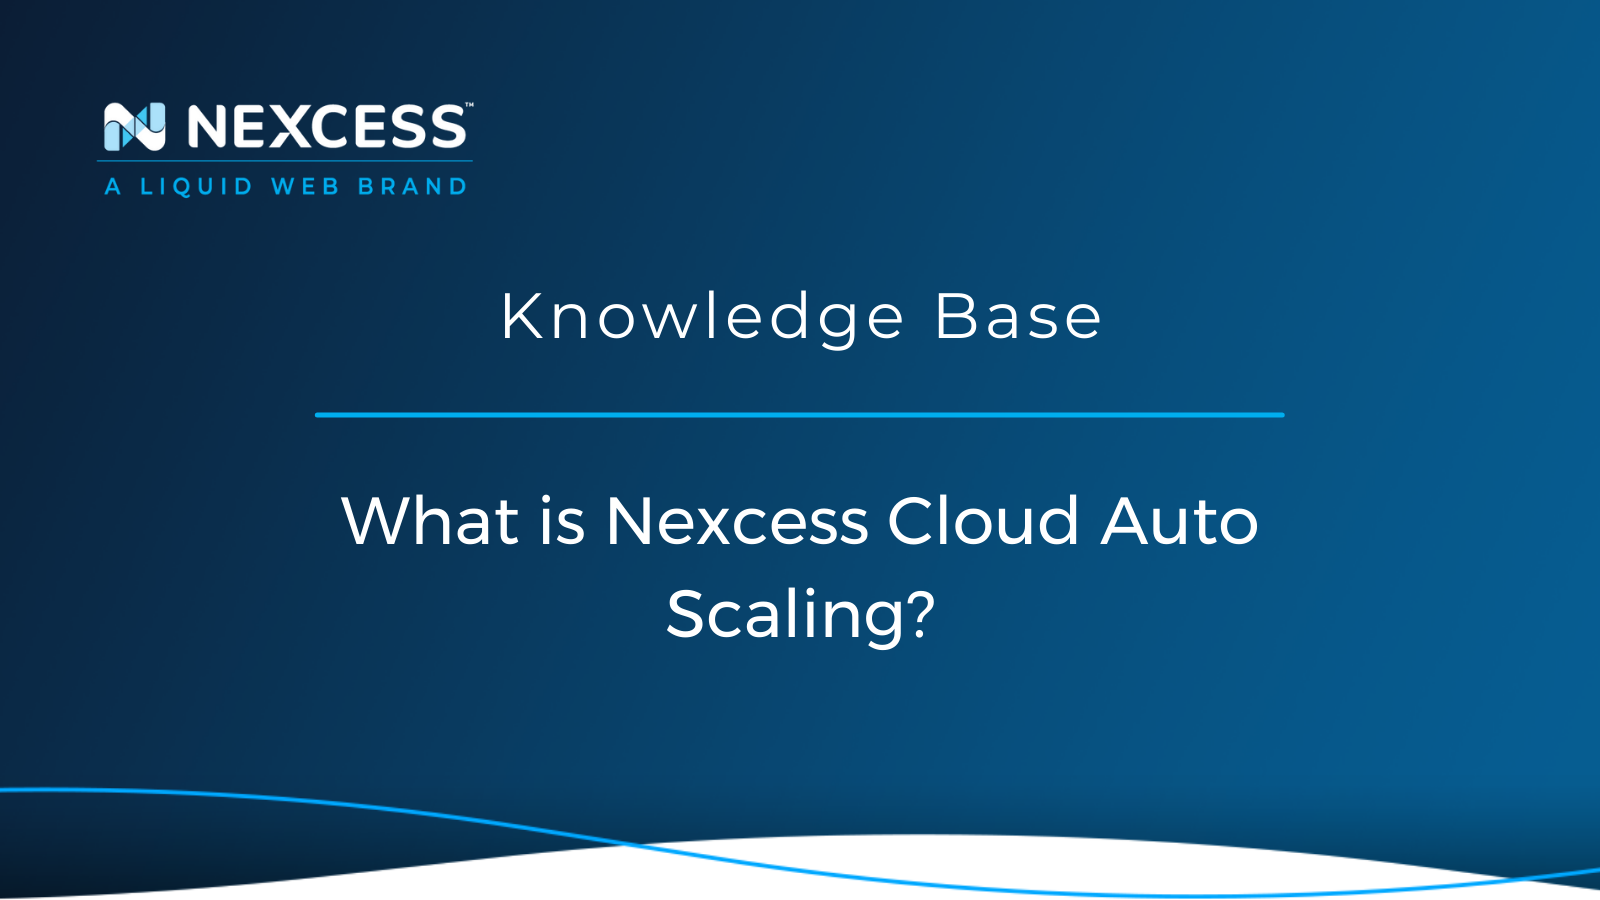 What is Nexcess Cloud Auto Scaling?